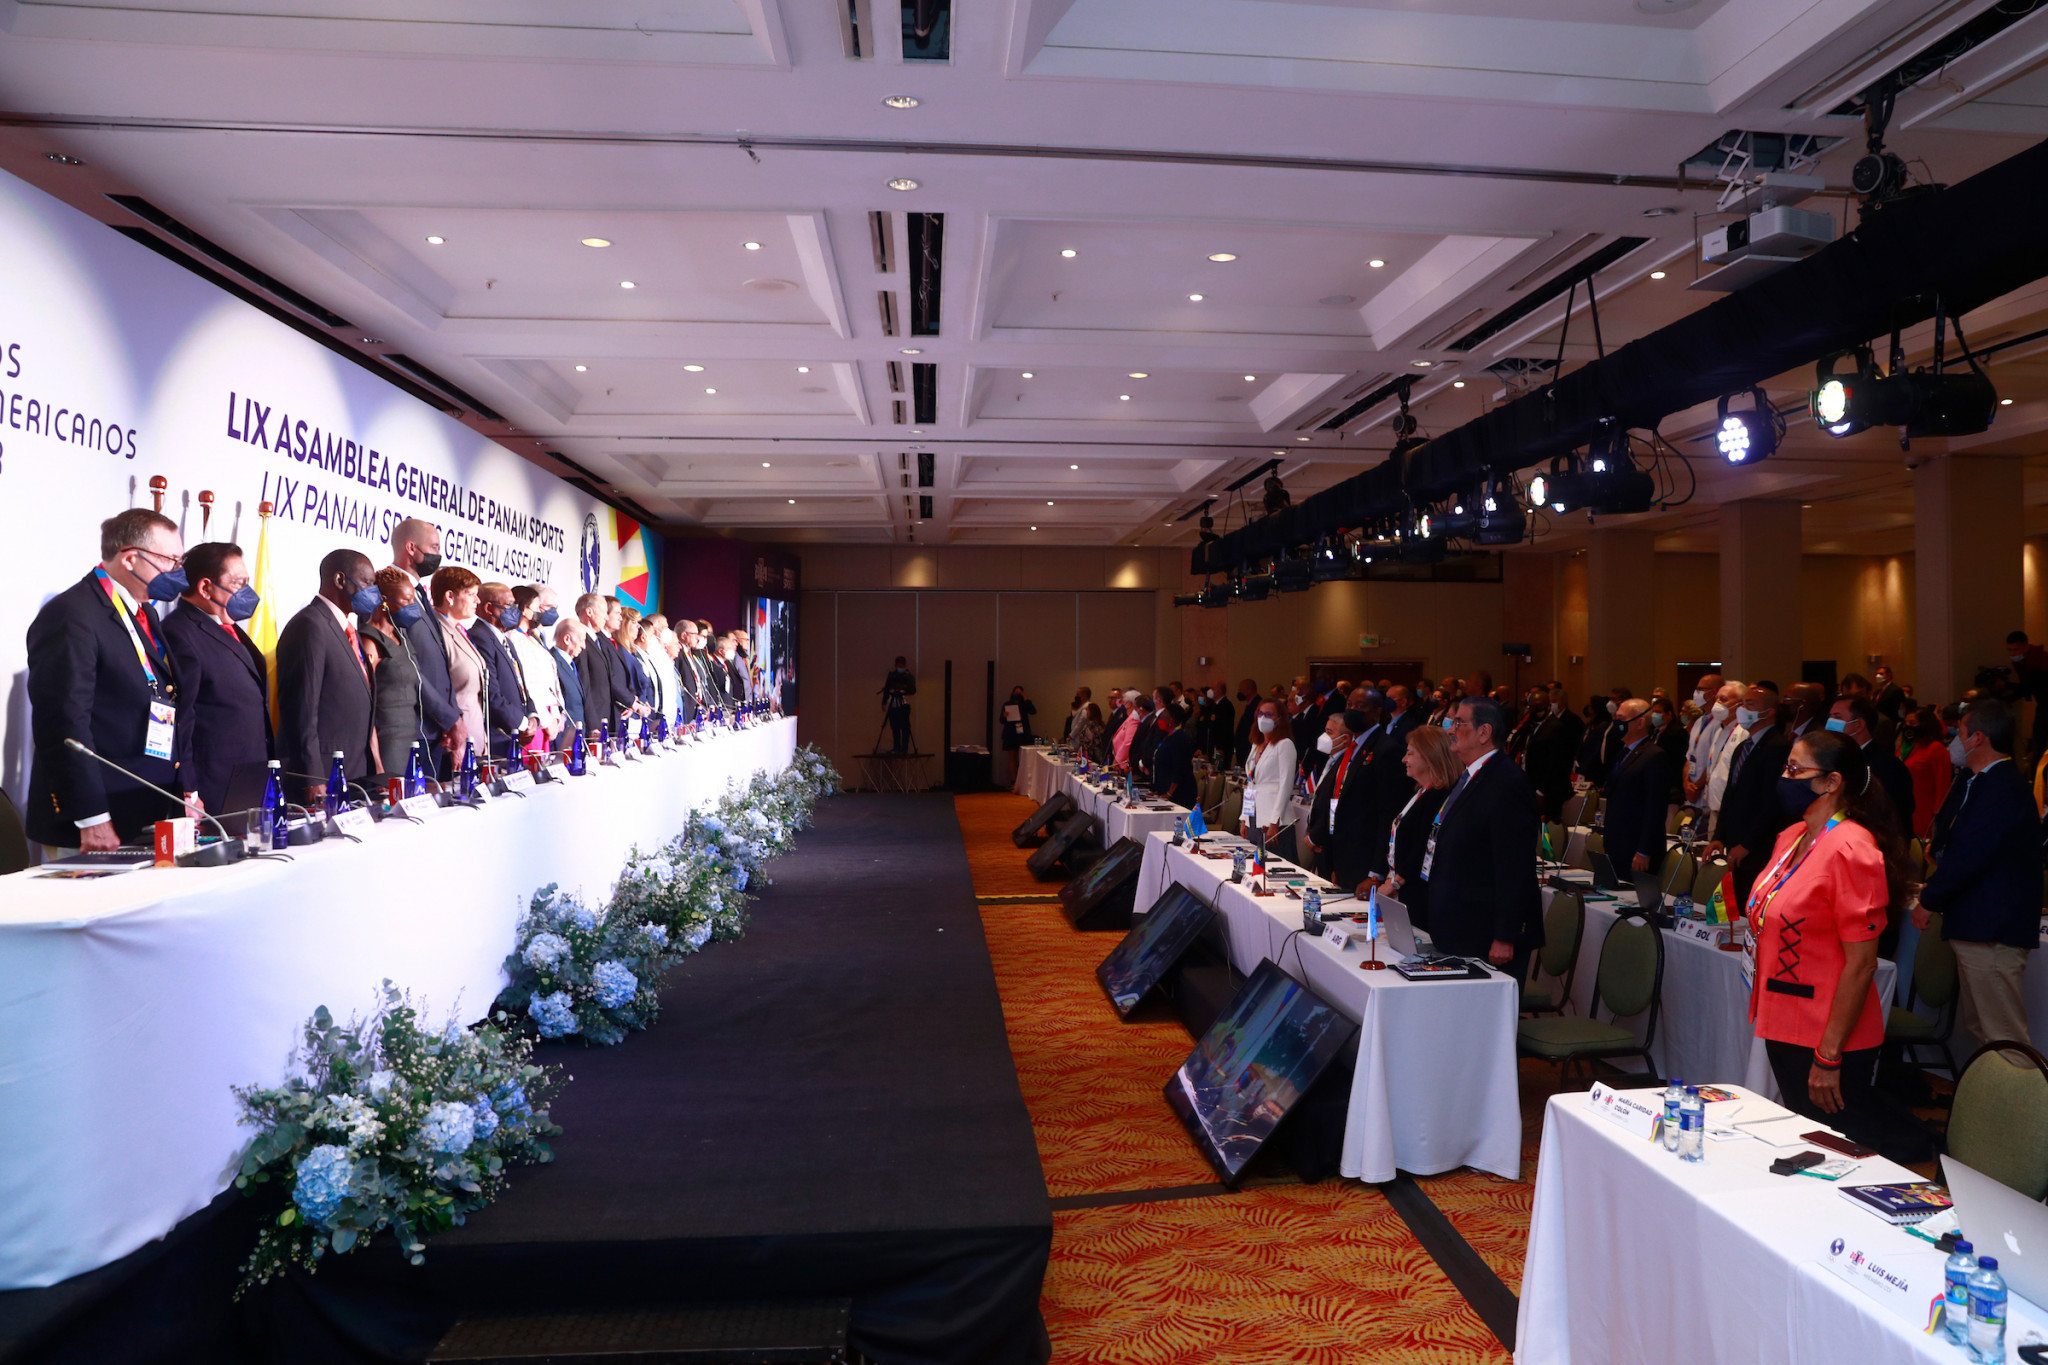 Panam Sports is staging its General Assembly in Cali ©Agencia.XpressMedia